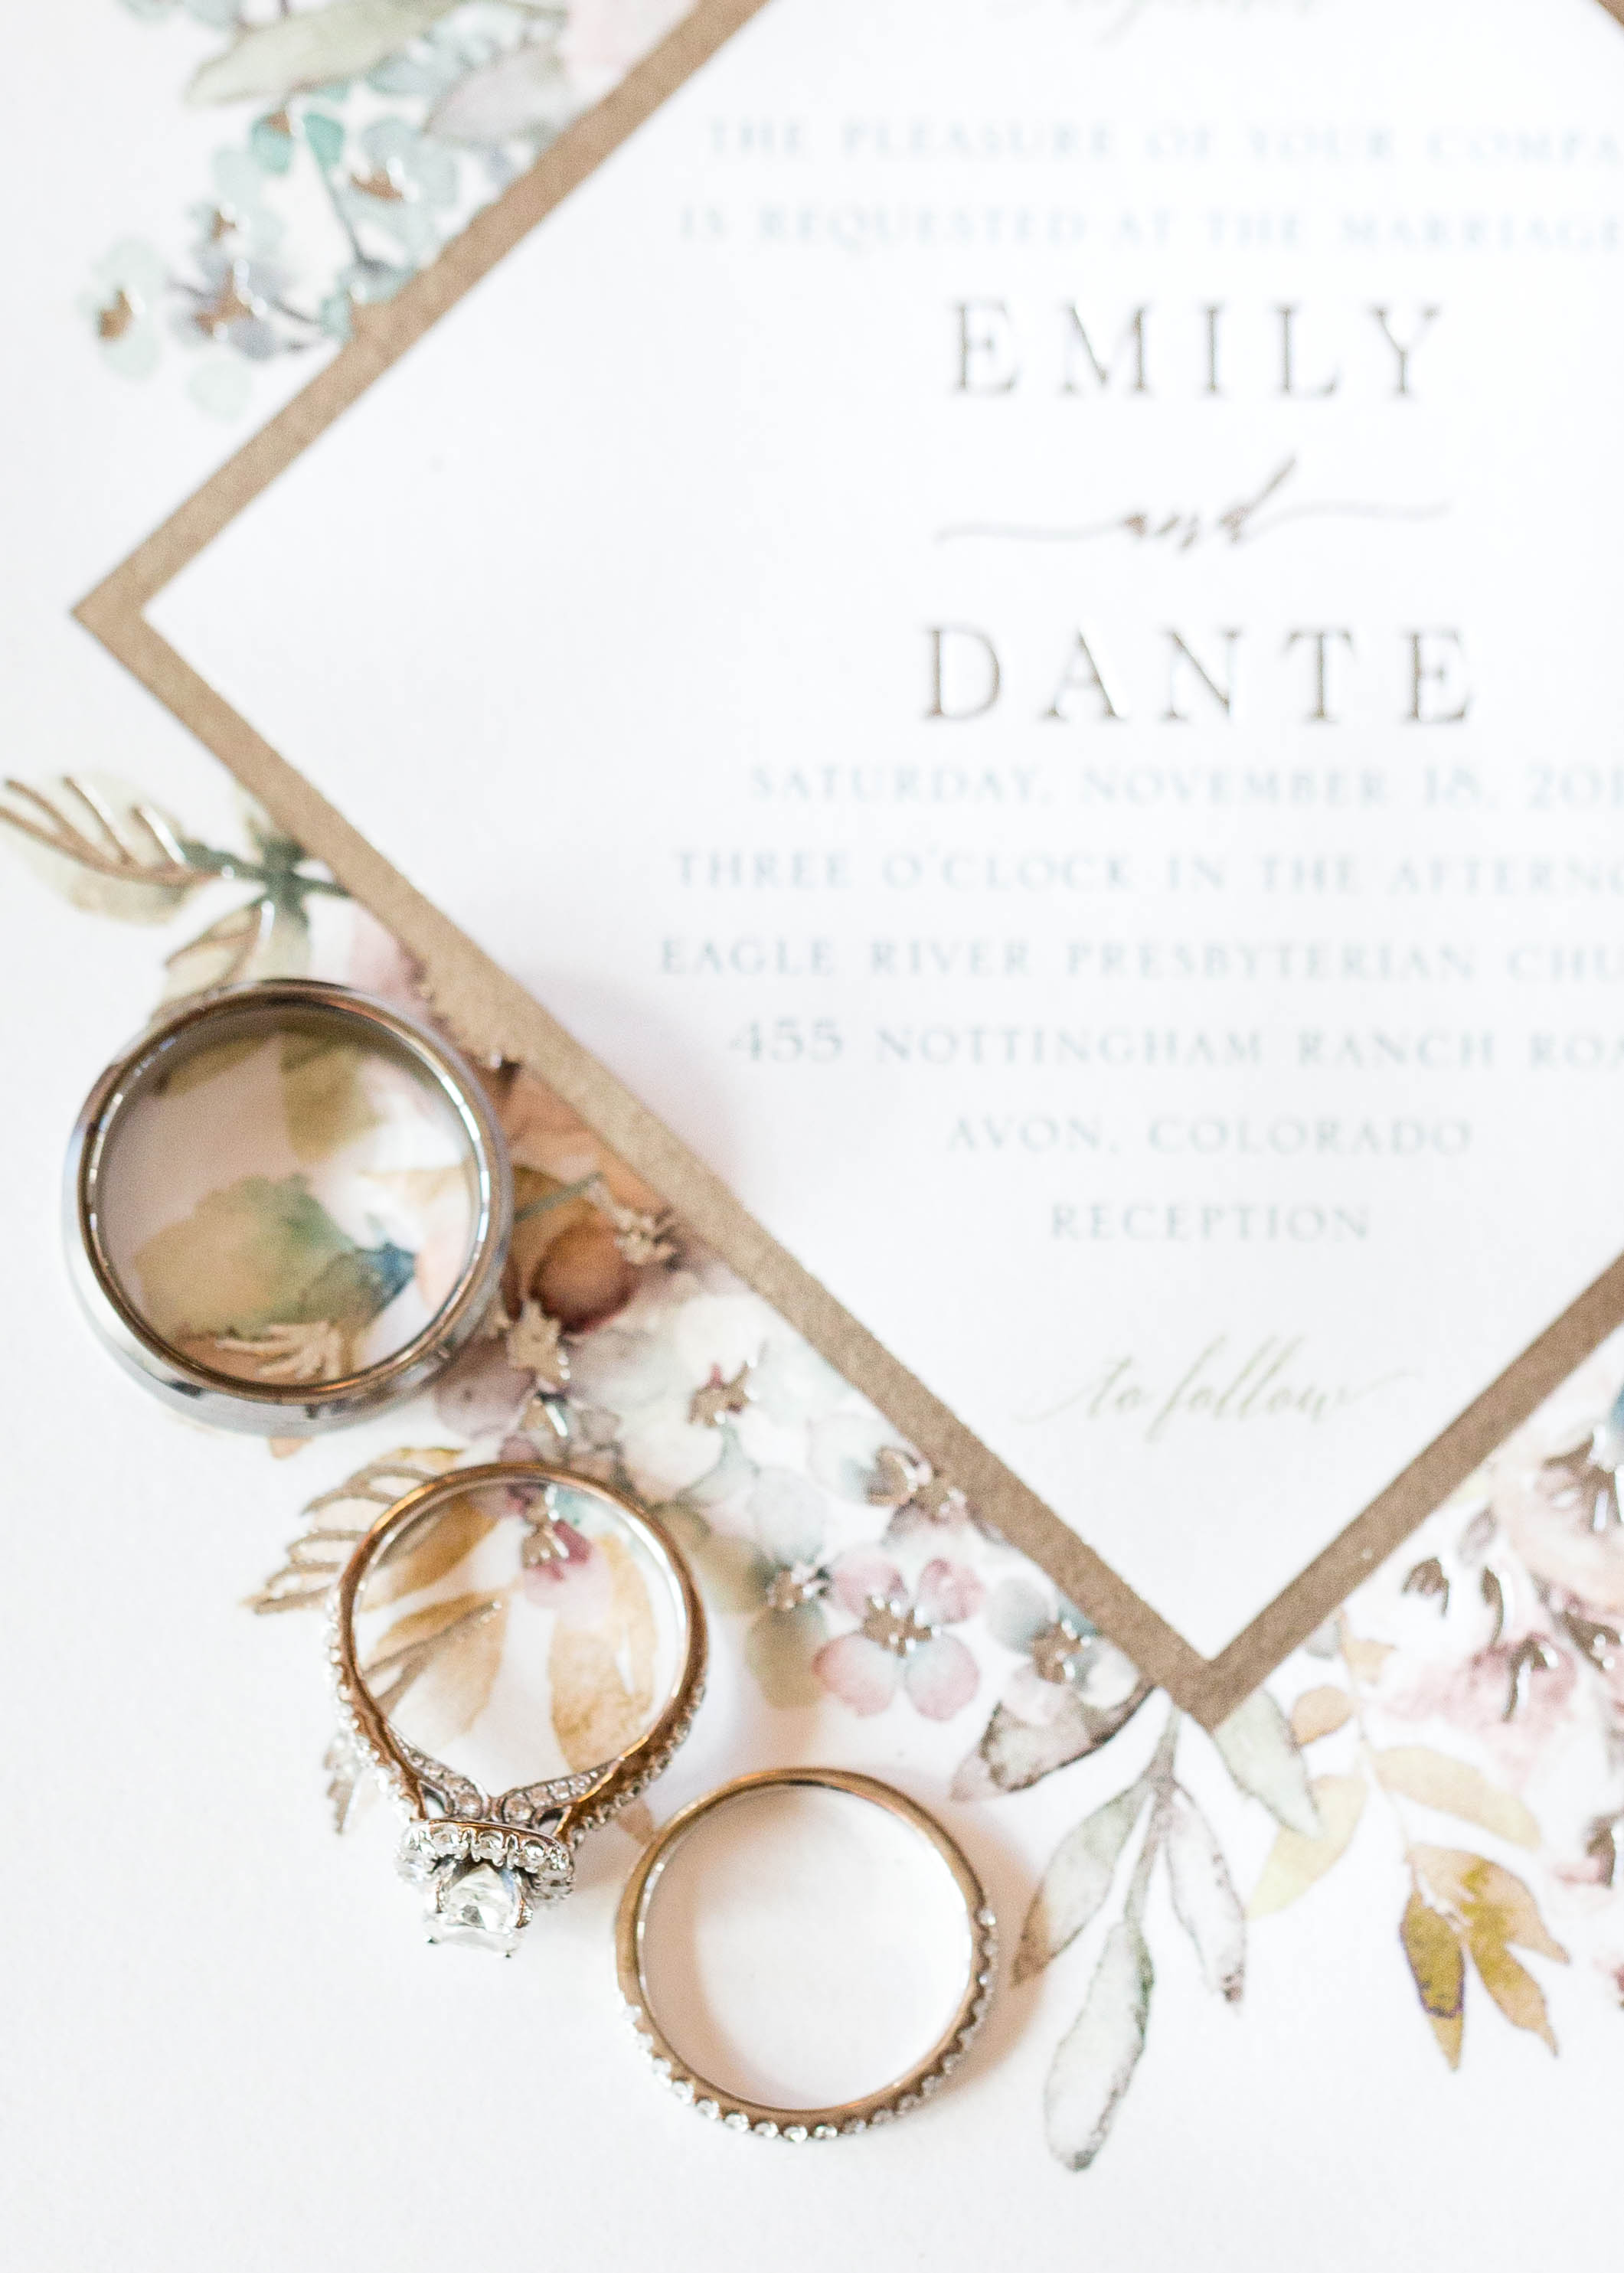 bride and groom's rings arranged diagonally on a gold and pastel floral invitation